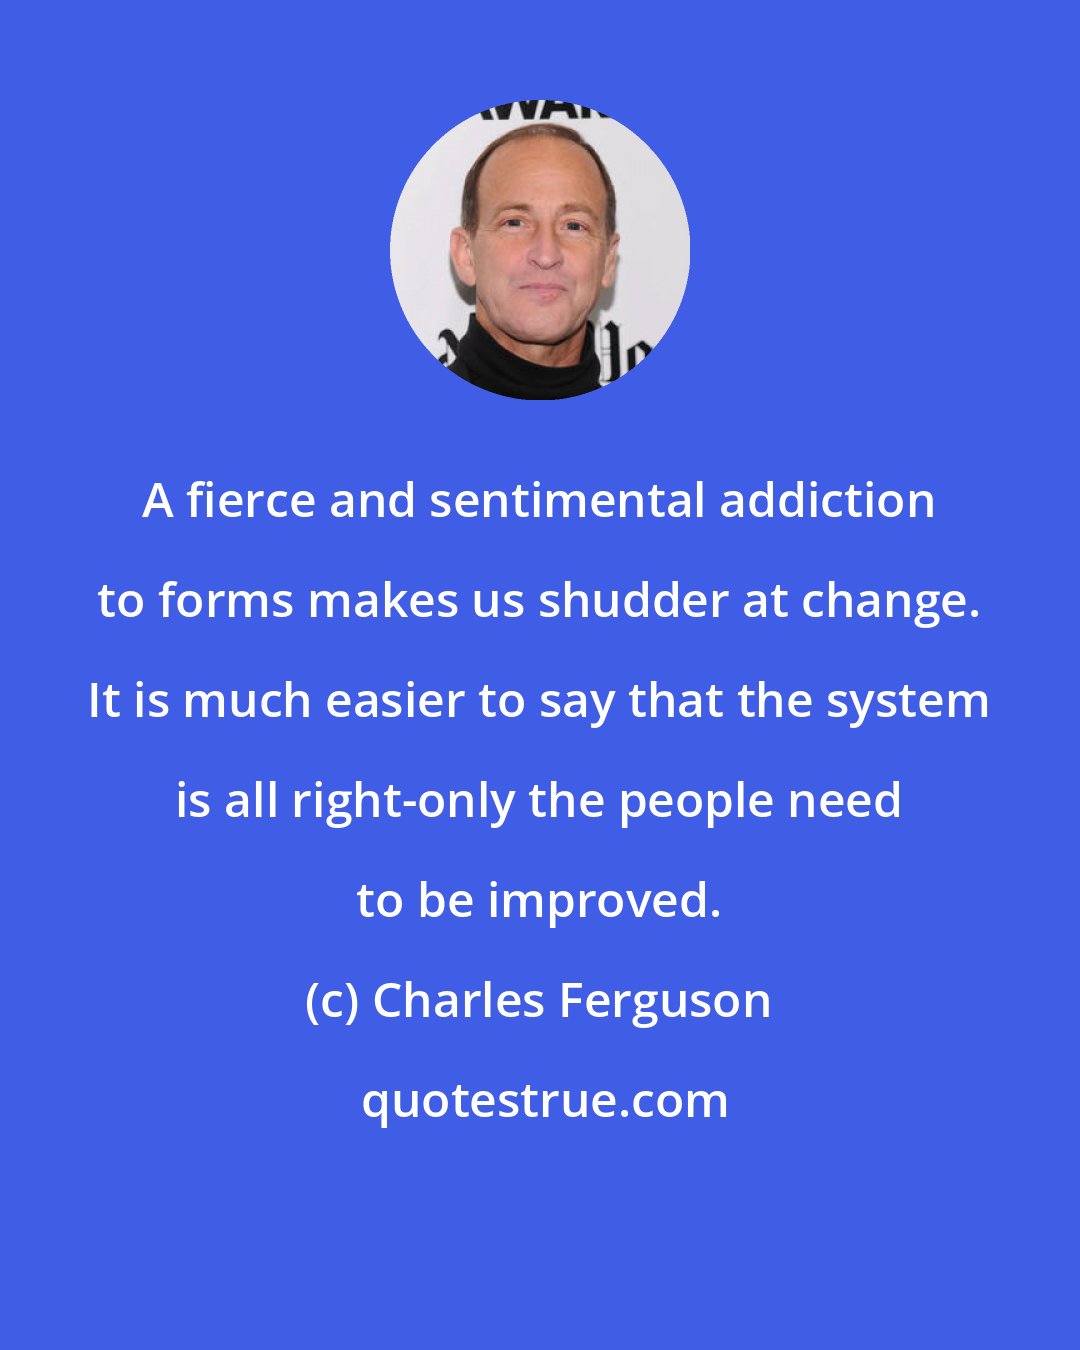 Charles Ferguson: A fierce and sentimental addiction to forms makes us shudder at change. It is much easier to say that the system is all right-only the people need to be improved.